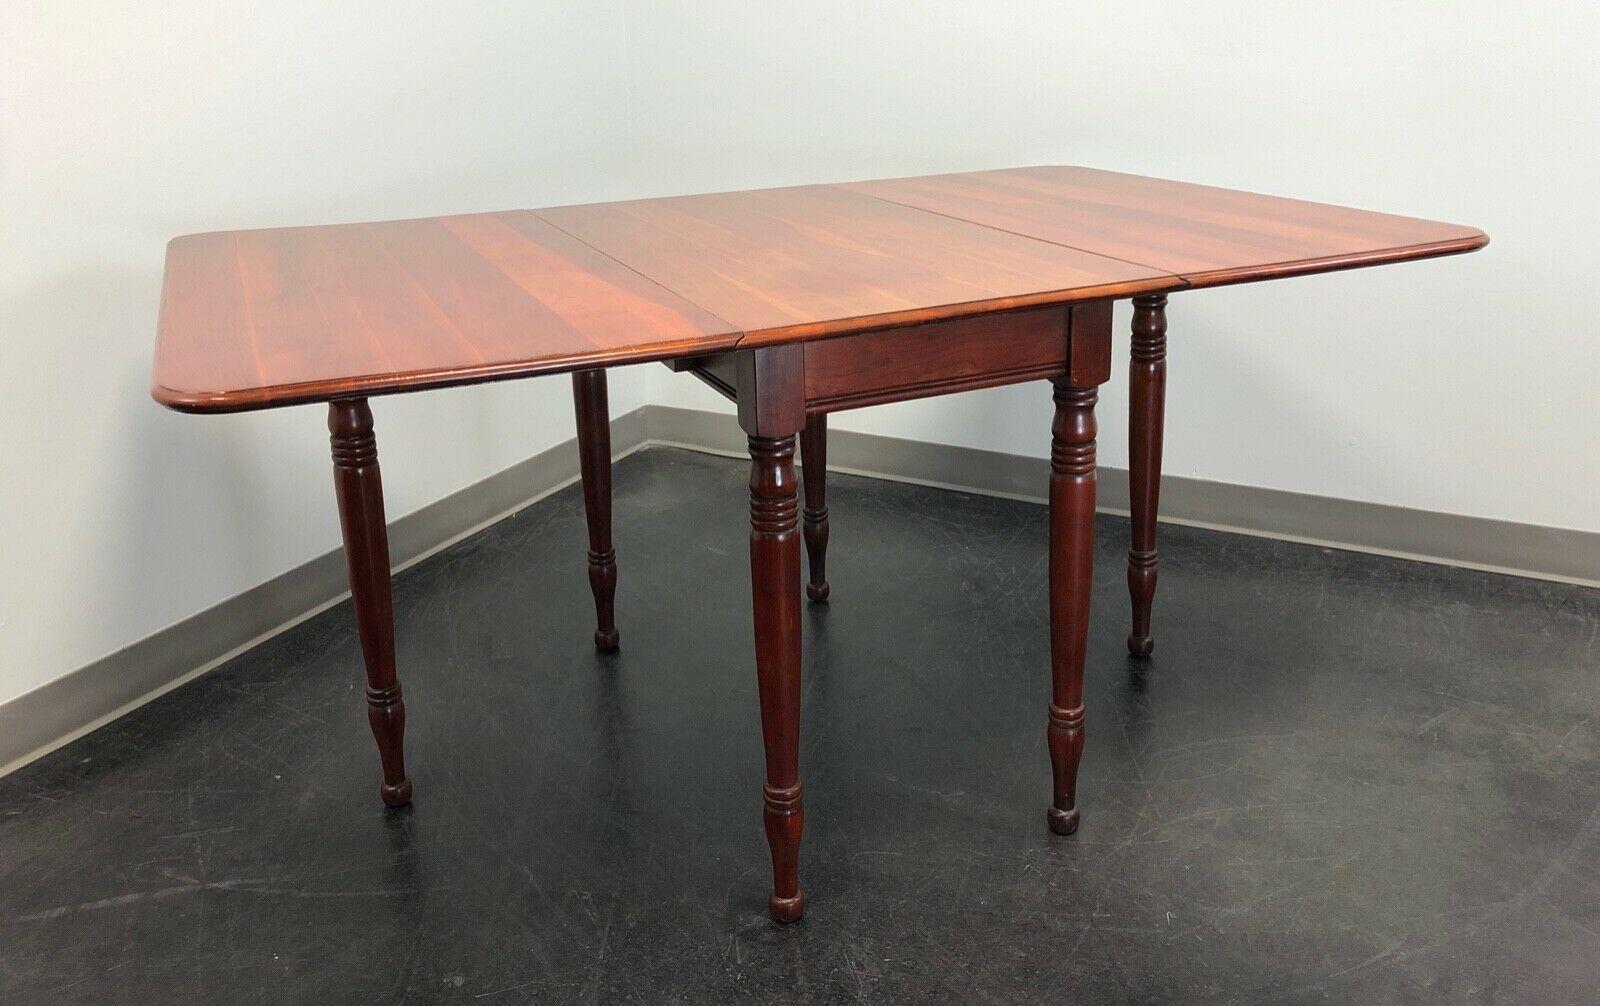 An antique Colonial style gateleg drop-leaf dining table, no makers mark. Solid cherry, a center apron and six turned legs, two being gateleg that swing out to support the drop leaves when raised. Made in the USA, in the late 19th - early 20th